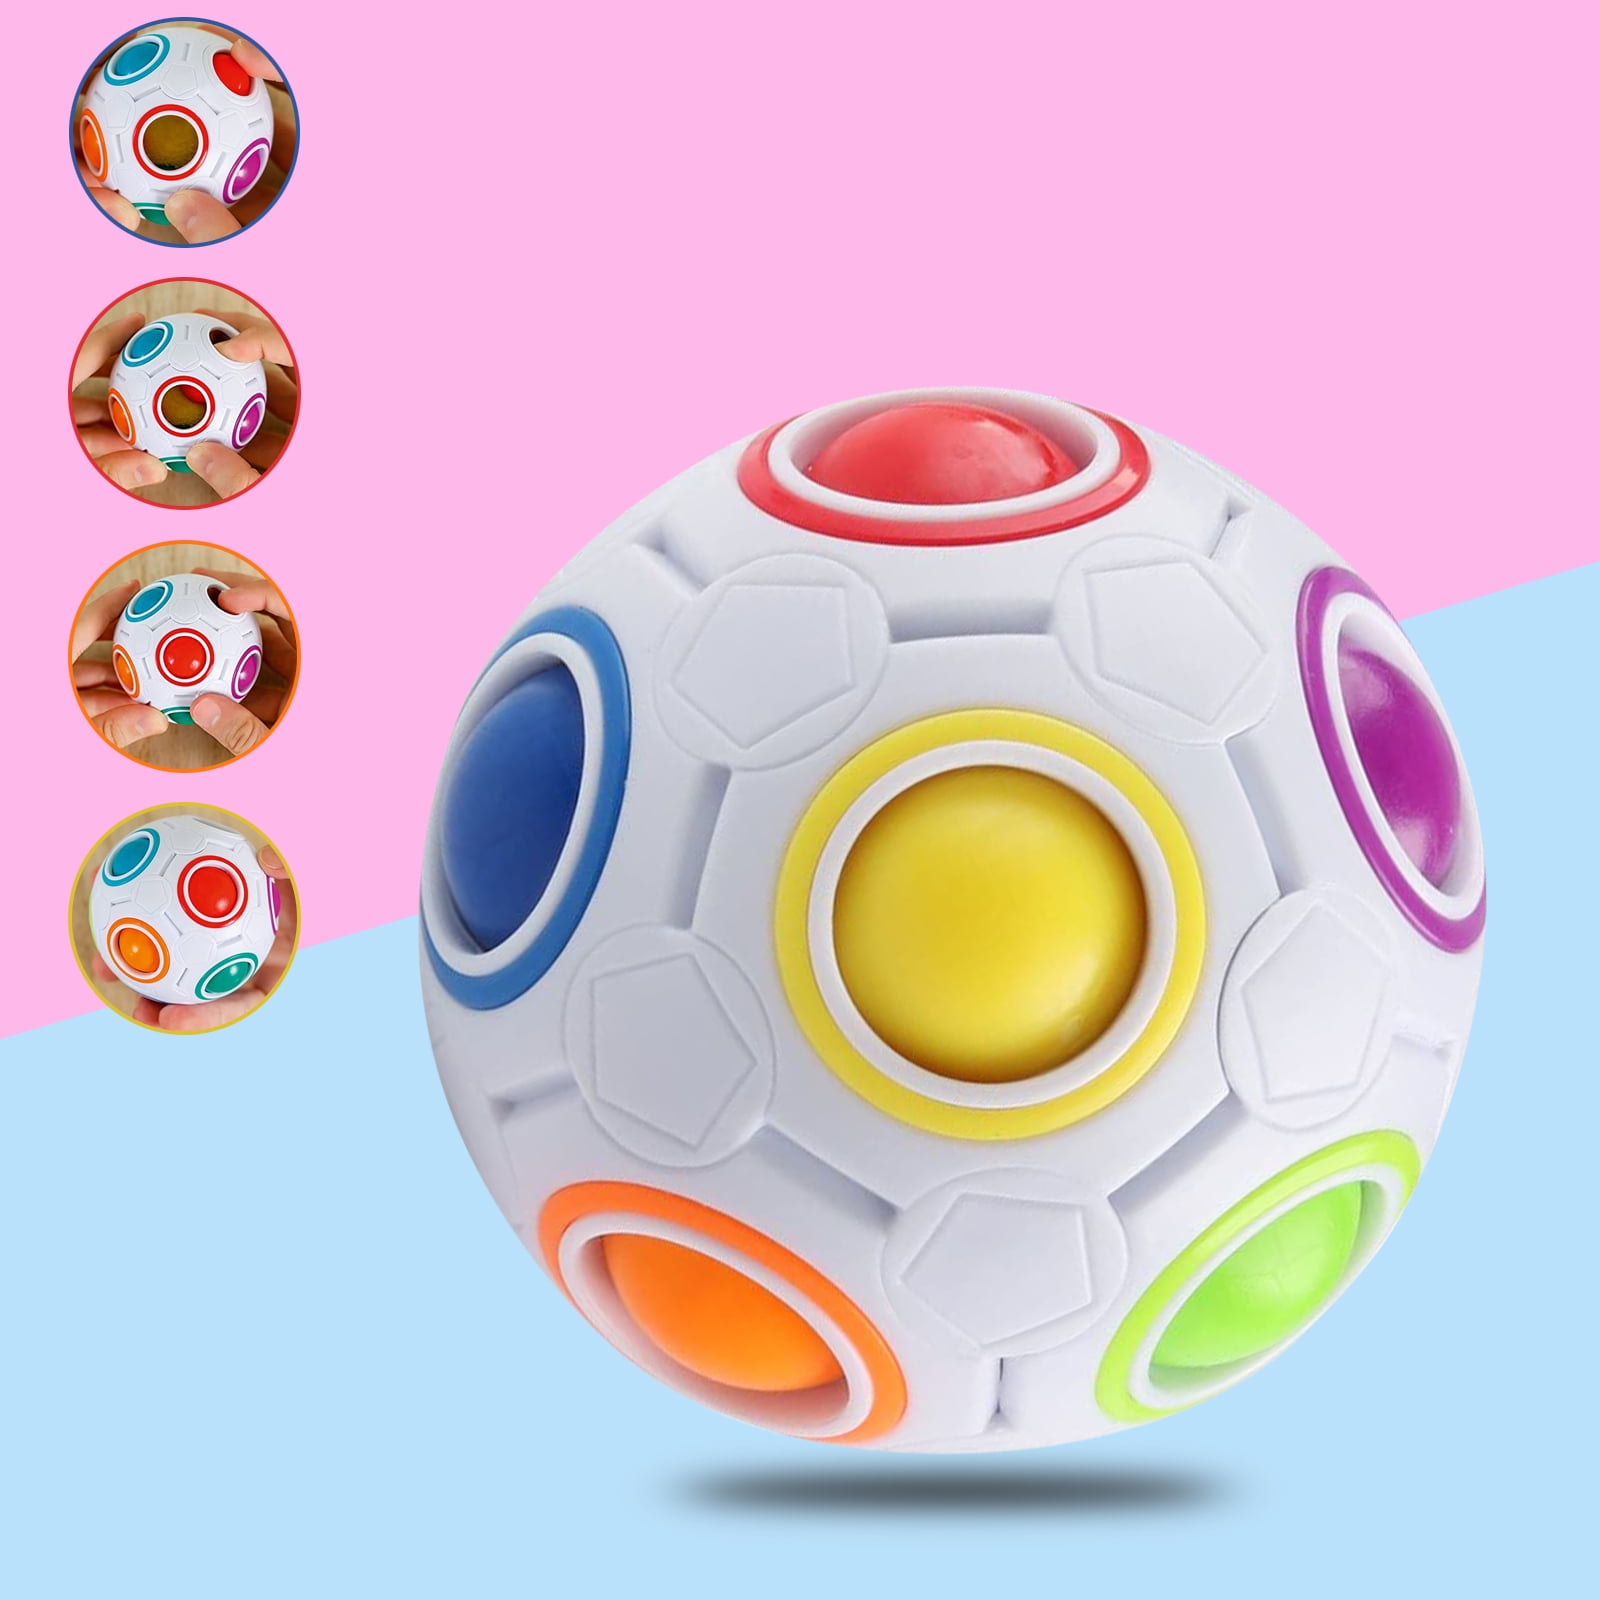 Kids Puzzle Game Fidget Toy 8 Holes, Stress Reliever Magic Rainbow Ball  Brain Teaser Games Toys for Children Teen & Adults